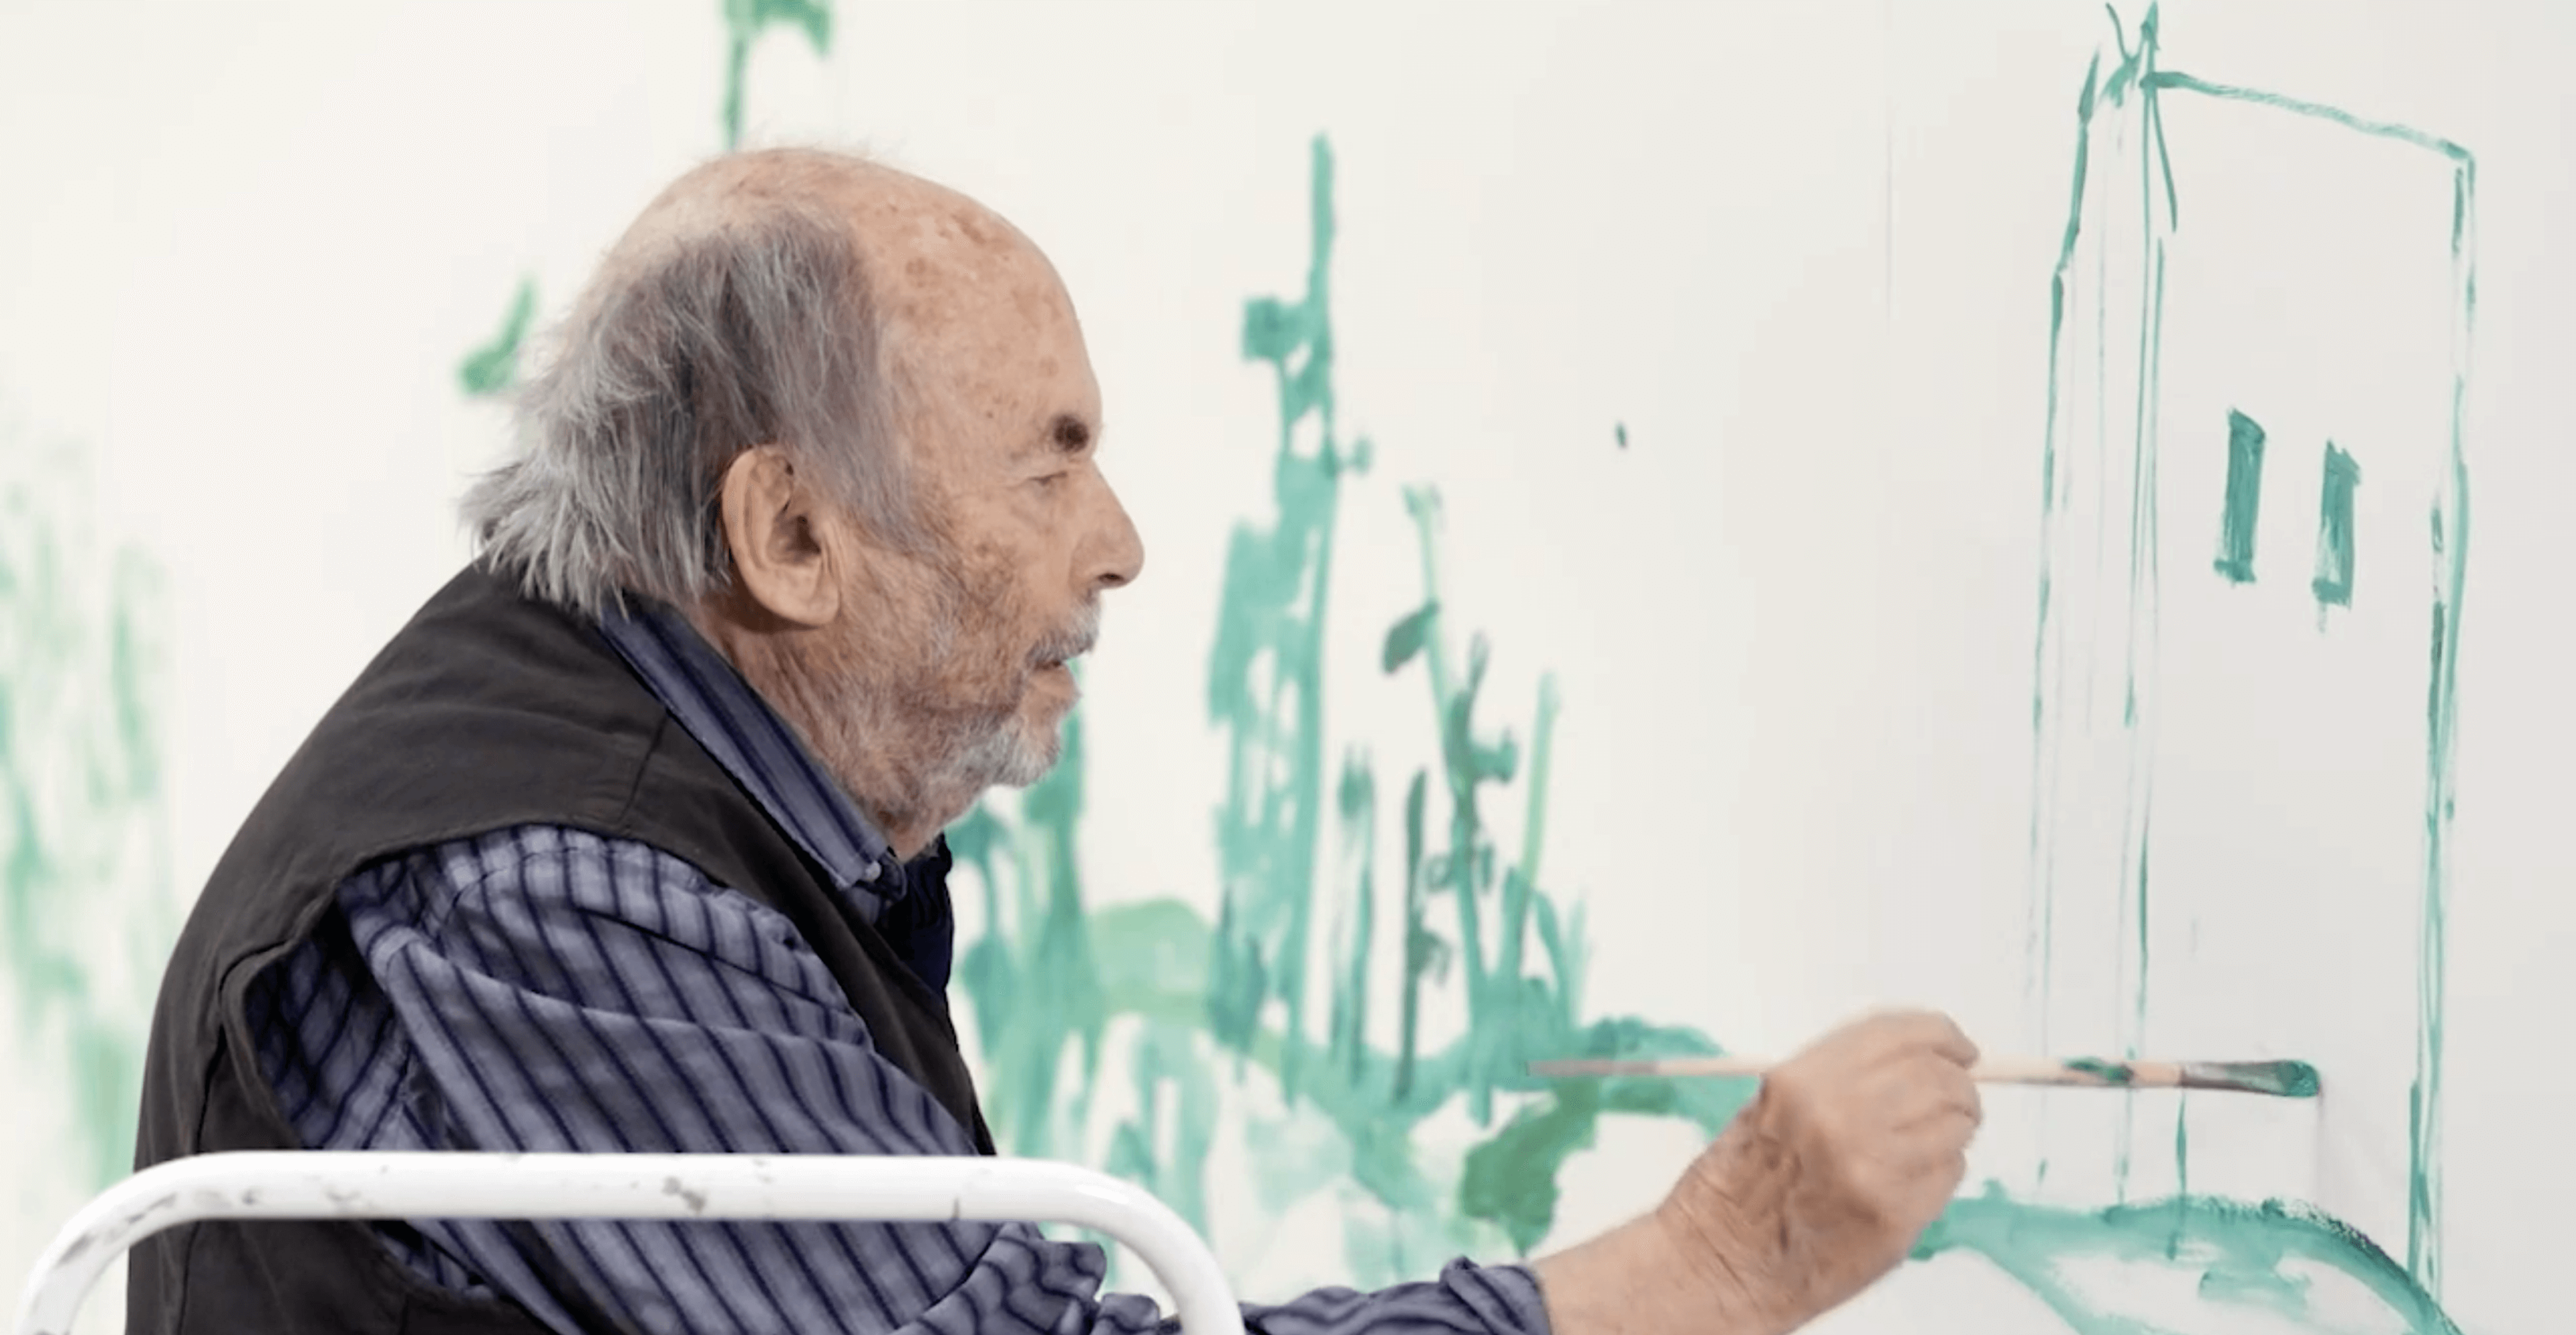 A photograph of Quentin Blake with a paint brush in his hand painting a building in green onto the wall.